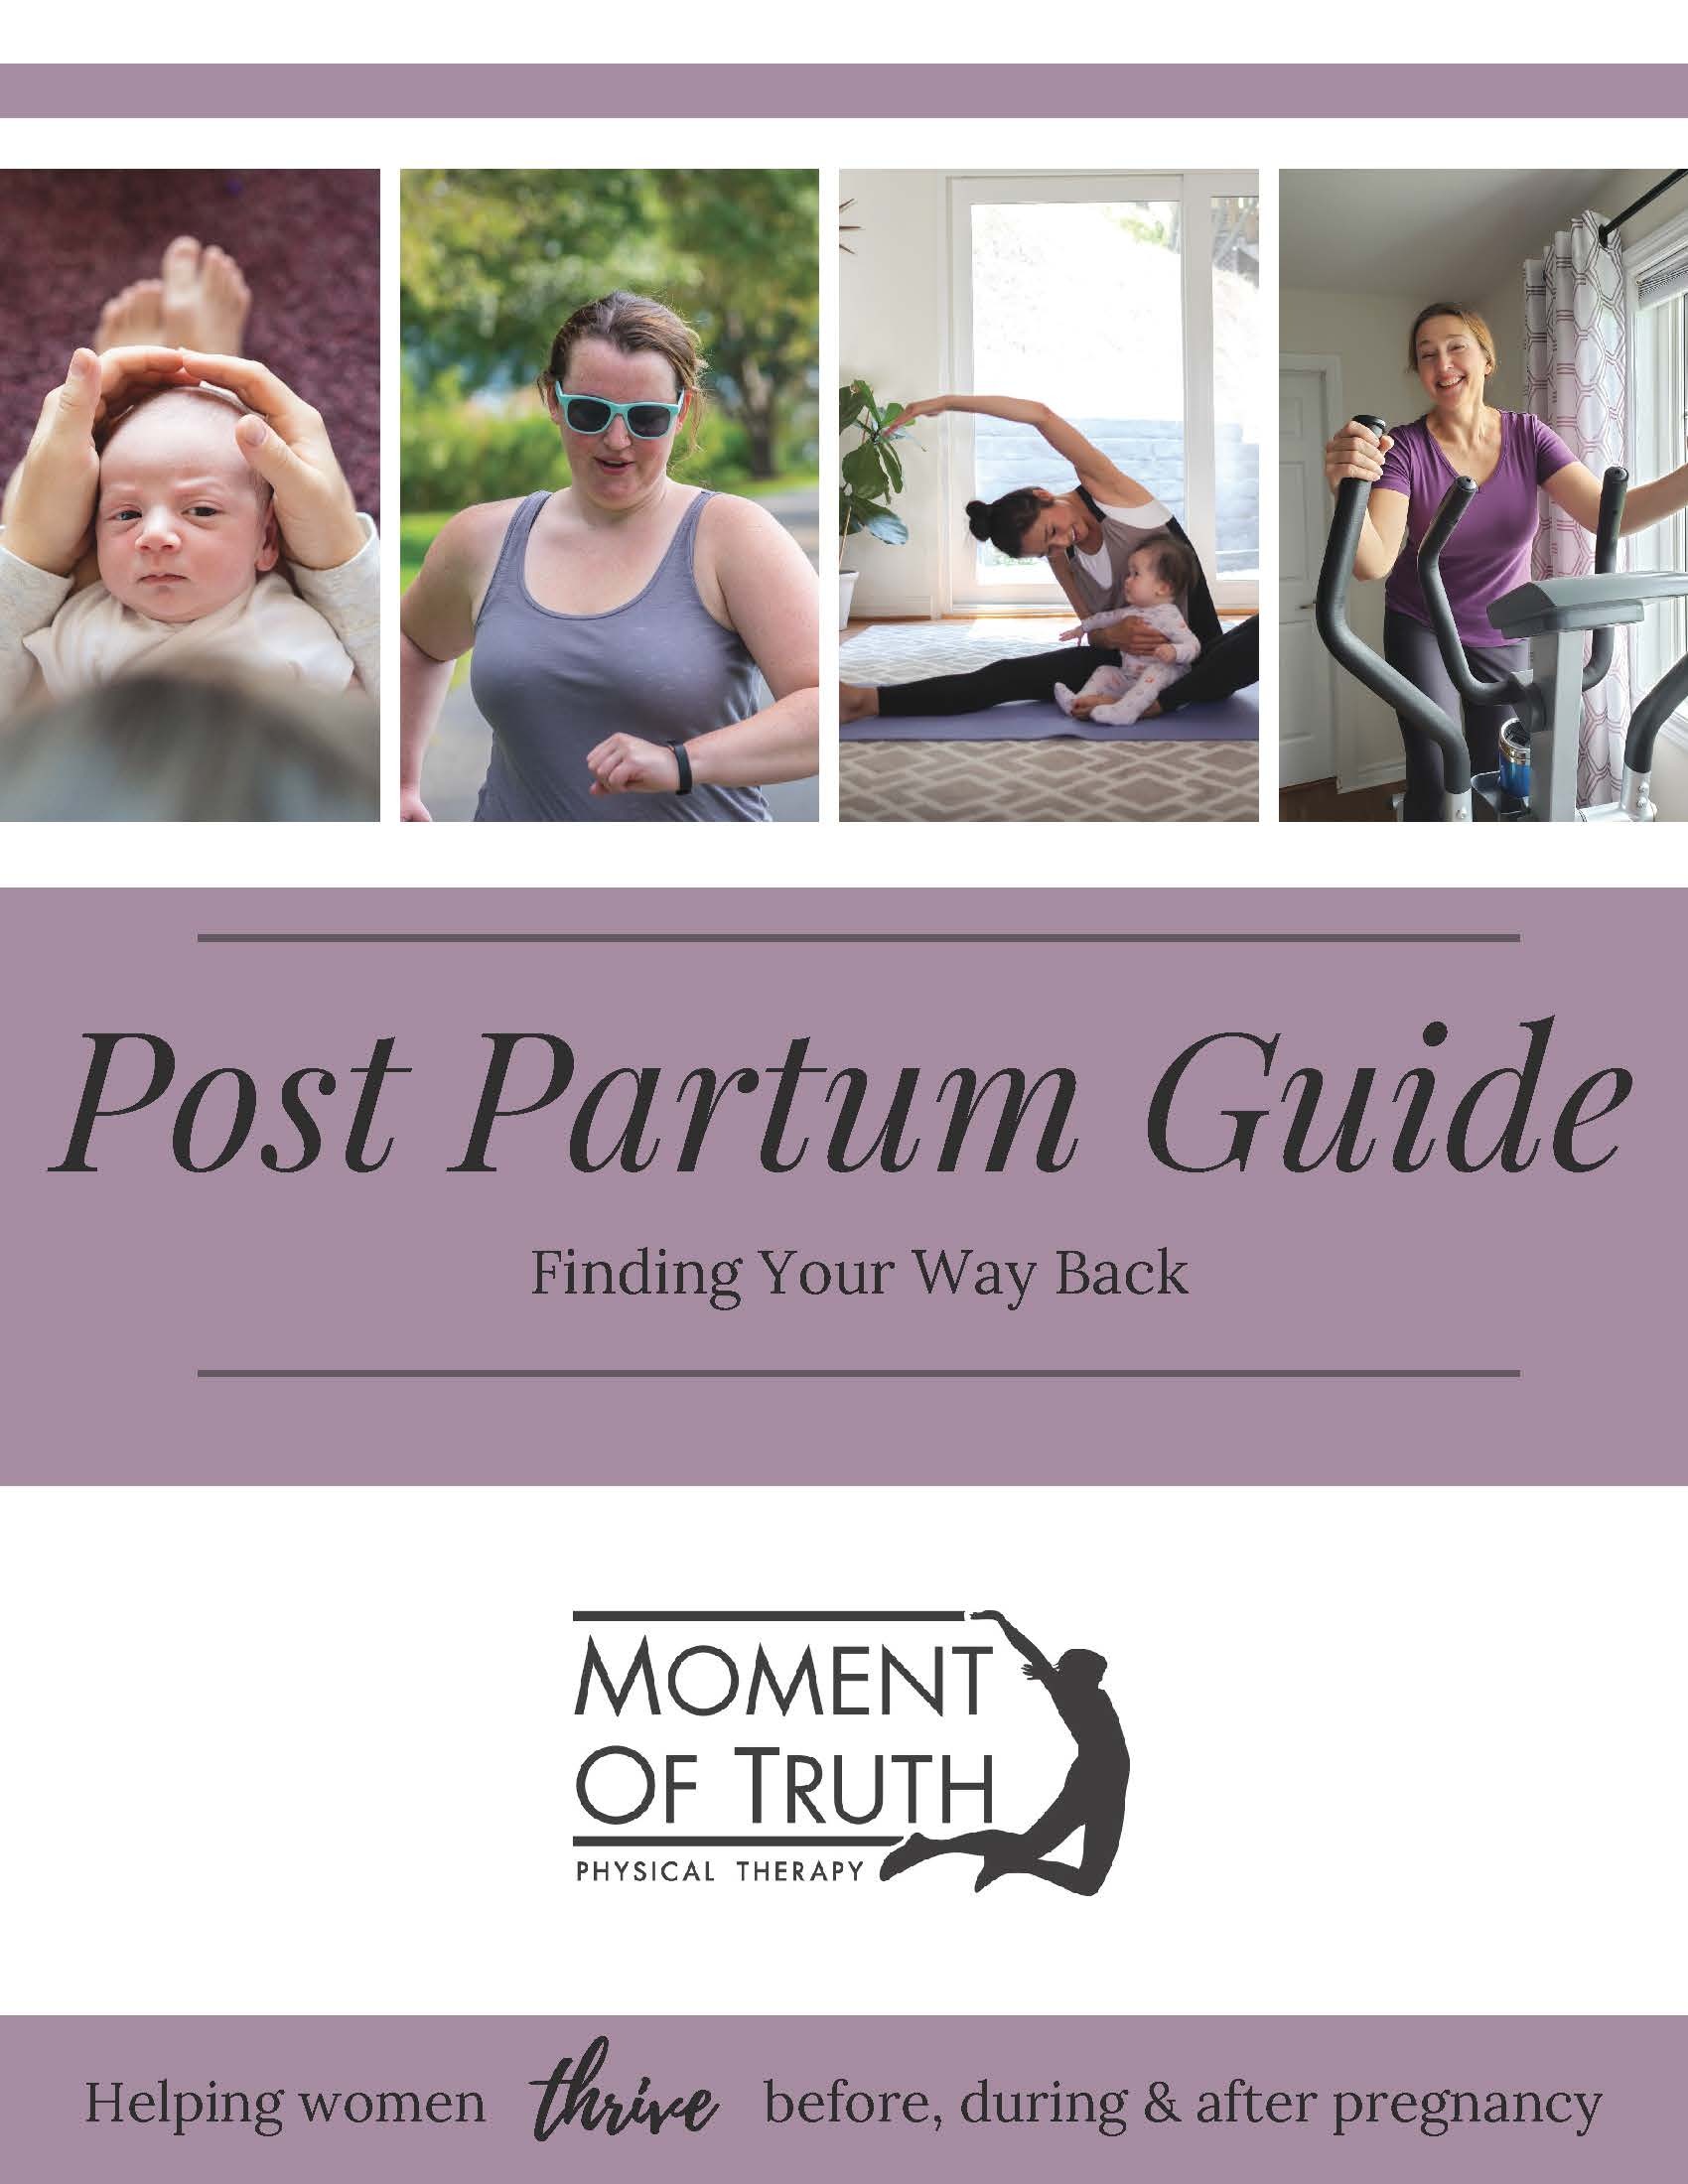 Download our Free Guide to Your First 12 Weeks Post Partum - Moment of Truth Physical Therapy